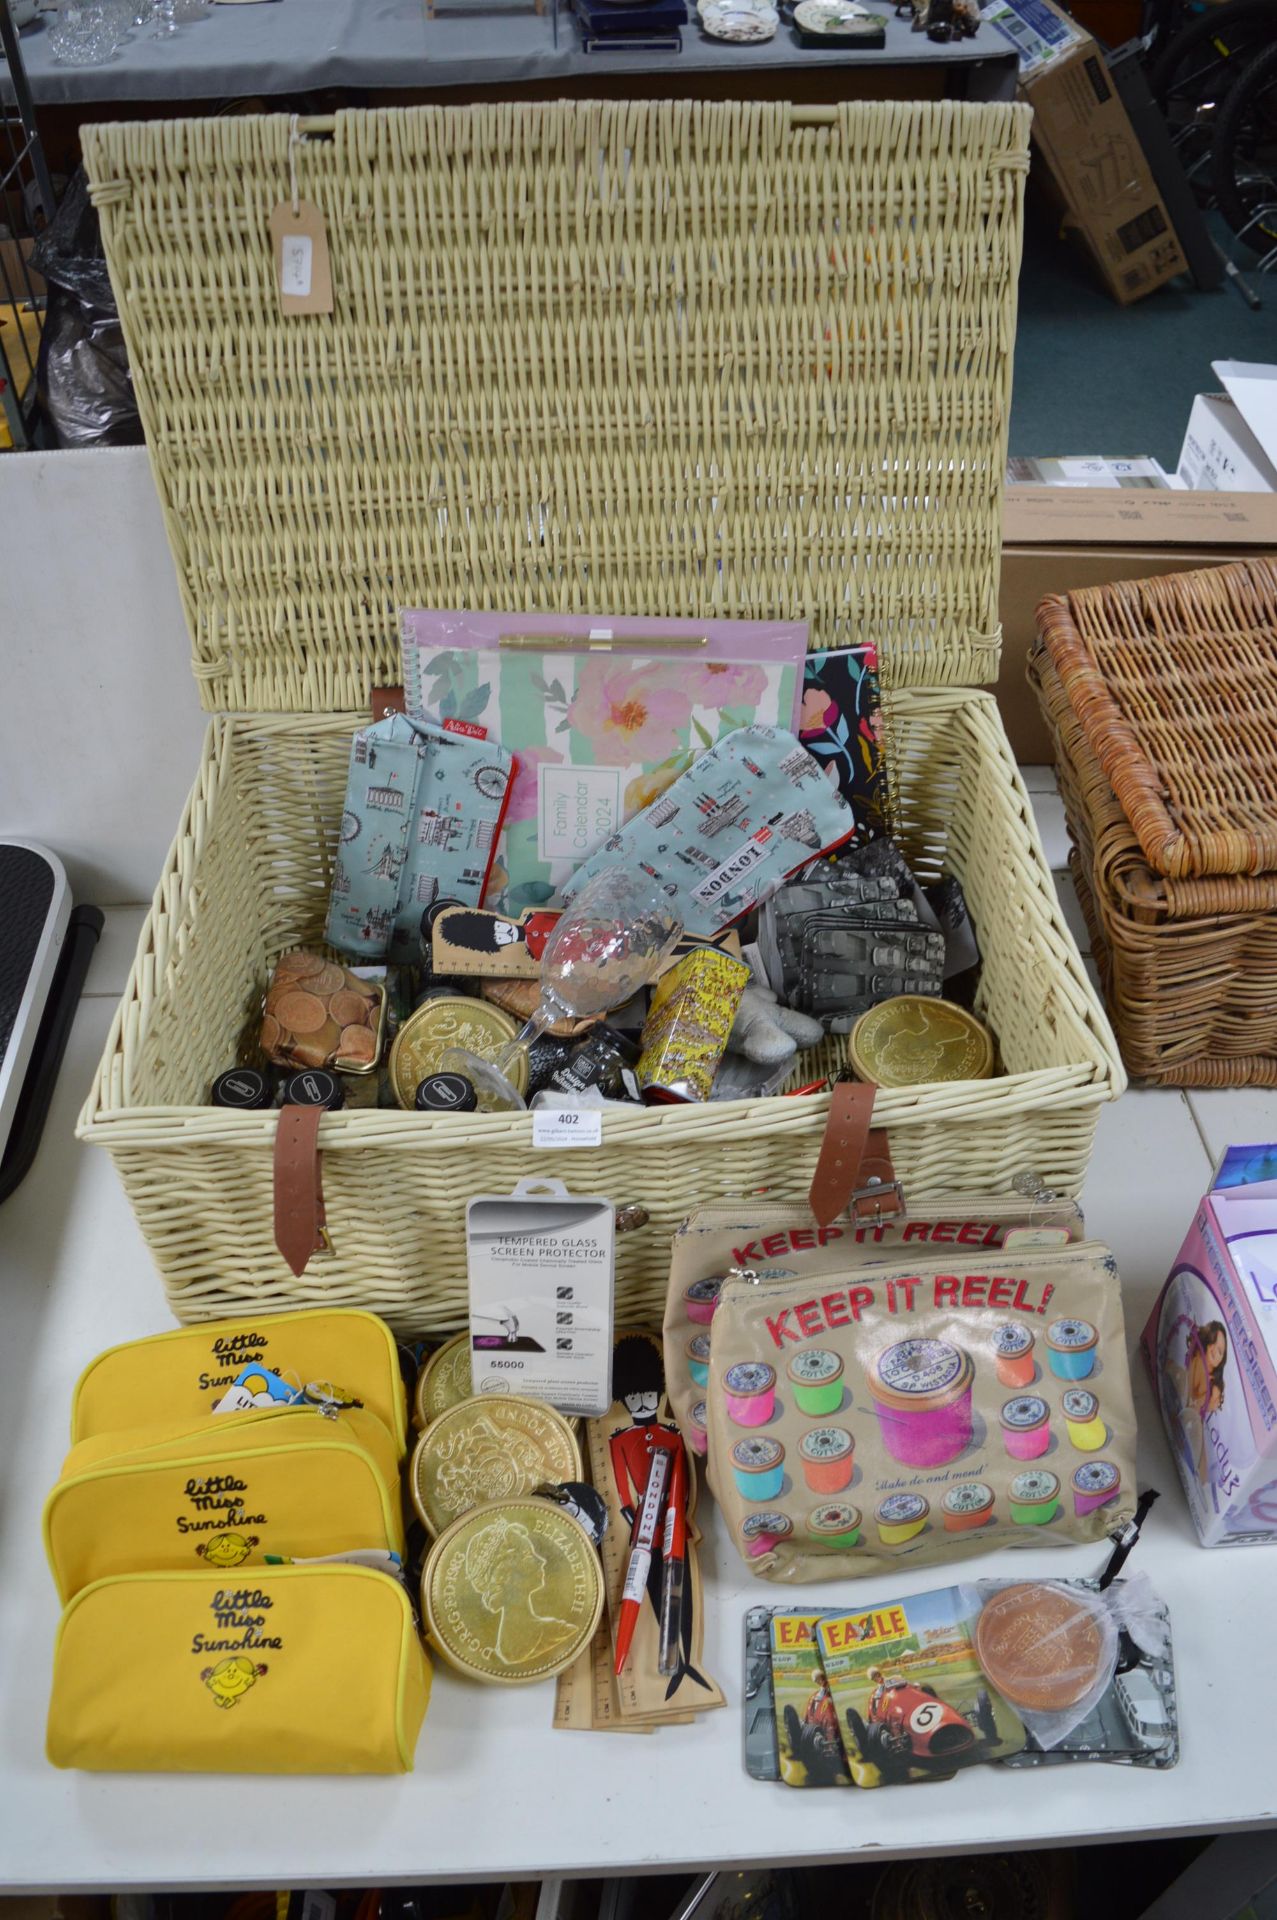 Picnic Basket Containing Craft Items, Gifts, and N